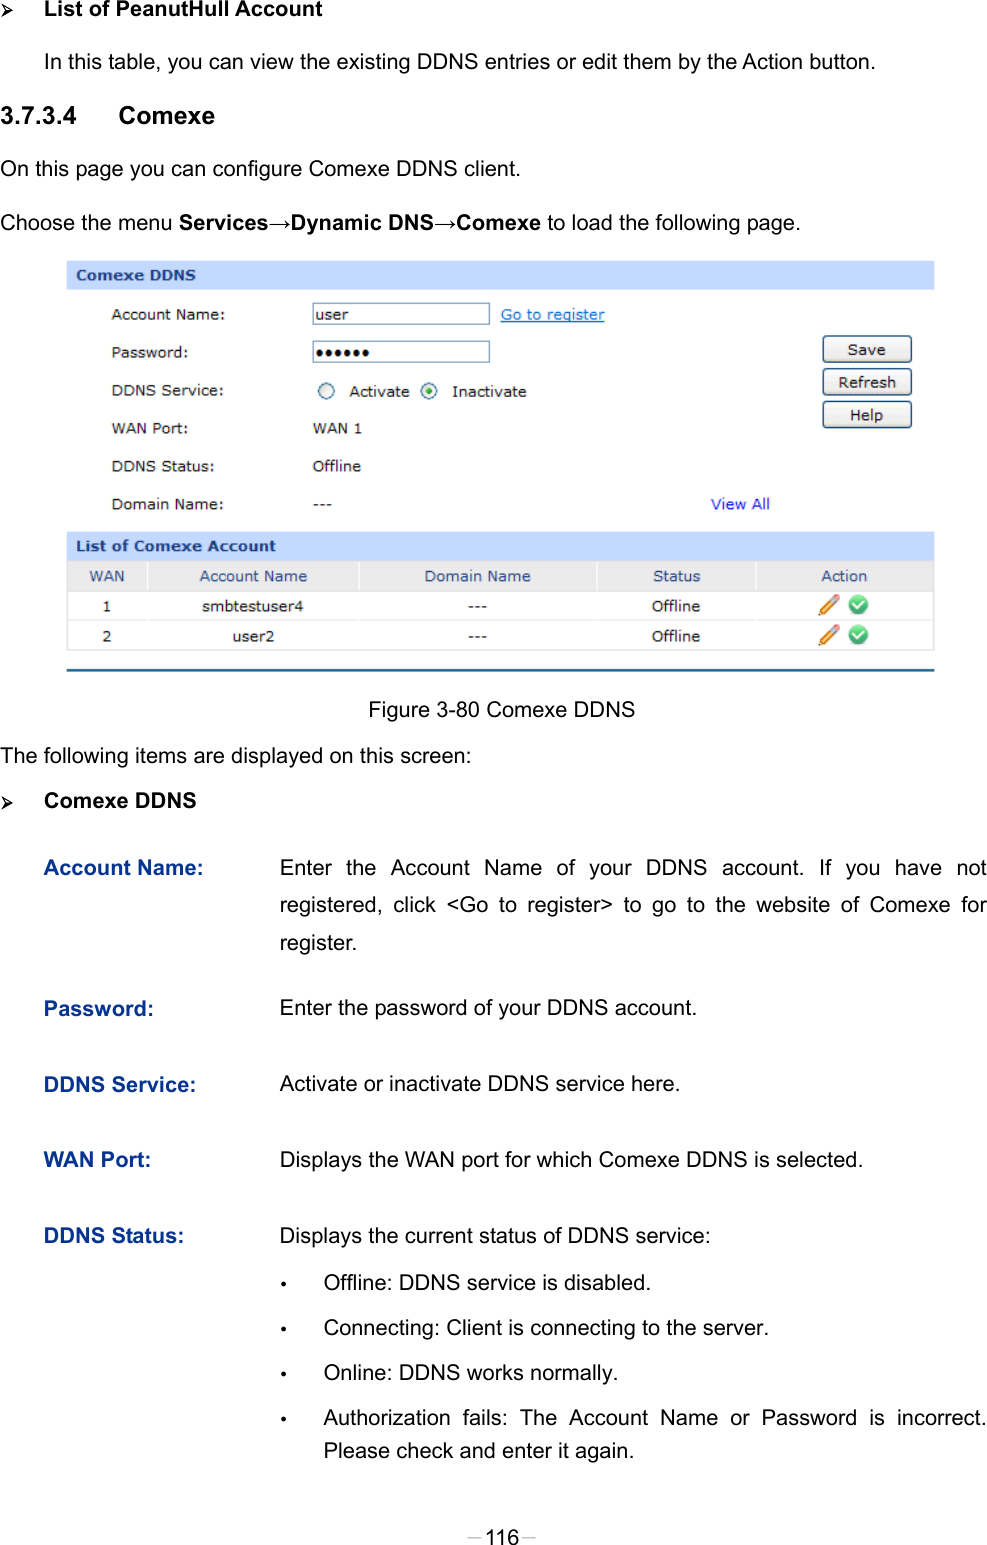   List of PeanutHull Account In this table, you can view the existing DDNS entries or edit them by the Action button. 3.7.3.4 Comexe On this page you can configure Comexe DDNS client. Choose the menu Services→Dynamic DNS→Comexe to load the following page.  Figure 3-80 Comexe DDNS The following items are displayed on this screen:  Comexe DDNS Account Name: Enter the Account Name of your DDNS account. If you have not registered, click &lt;Go to register&gt; to go to the website of Comexe for register. Password: Enter the password of your DDNS account. DDNS Service: Activate or inactivate DDNS service here. WAN Port: Displays the WAN port for which Comexe DDNS is selected. DDNS Status: Displays the current status of DDNS service:  Offline: DDNS service is disabled.  Connecting: Client is connecting to the server.  Online: DDNS works normally.  Authorization fails: The Account Name or Password is incorrect. Please check and enter it again. -116- 